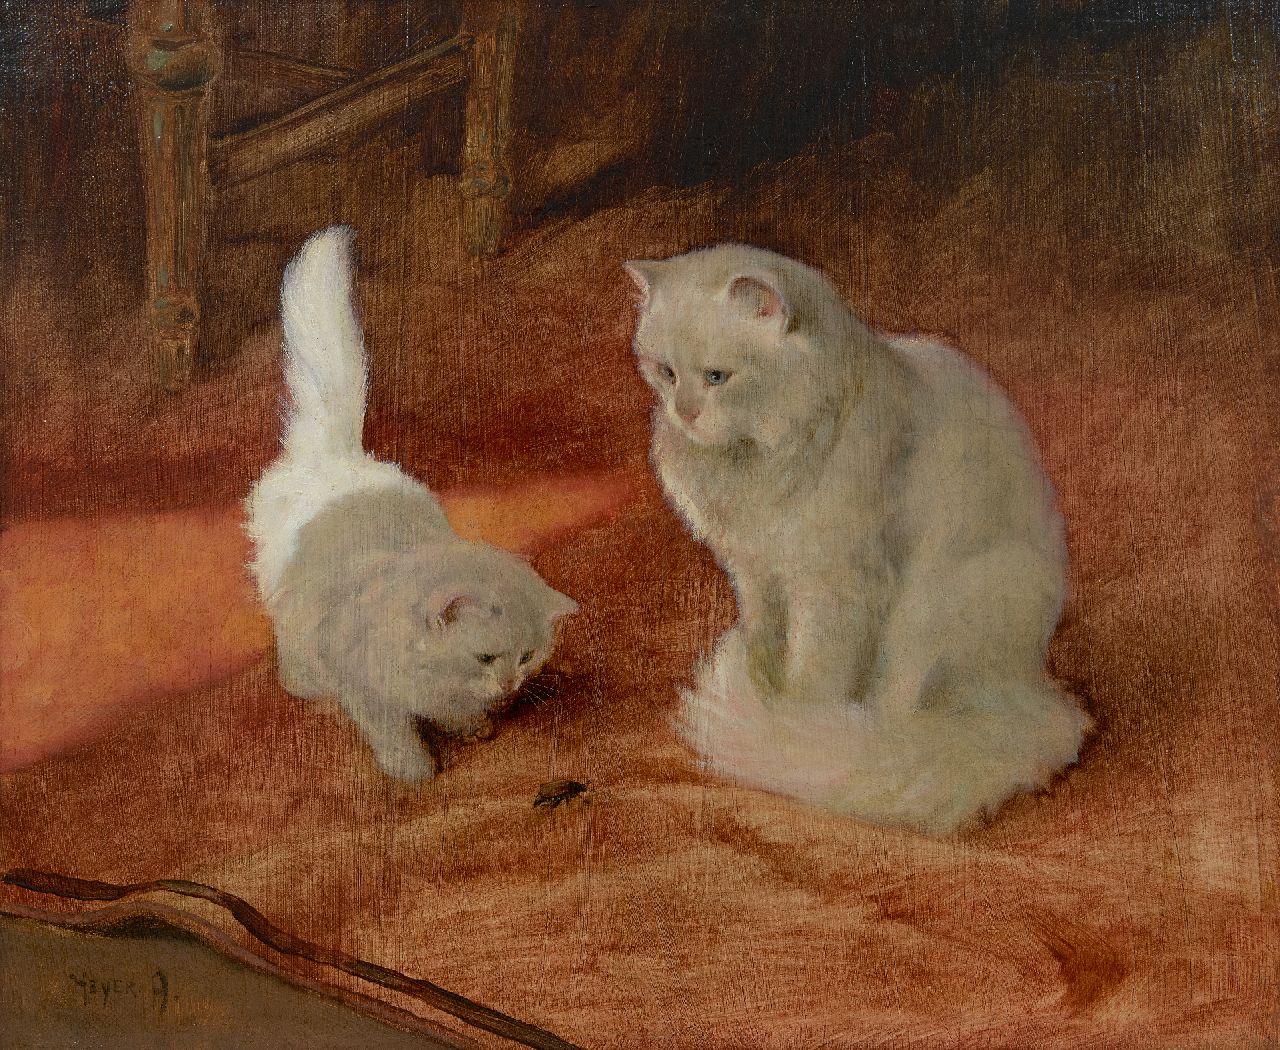 Heyer A.  | Arthur Heyer | Paintings offered for sale | Angora cat and kitten with a beetle, oil on canvas laid down on board 56.2 x 68.0 cm, signed l.l.